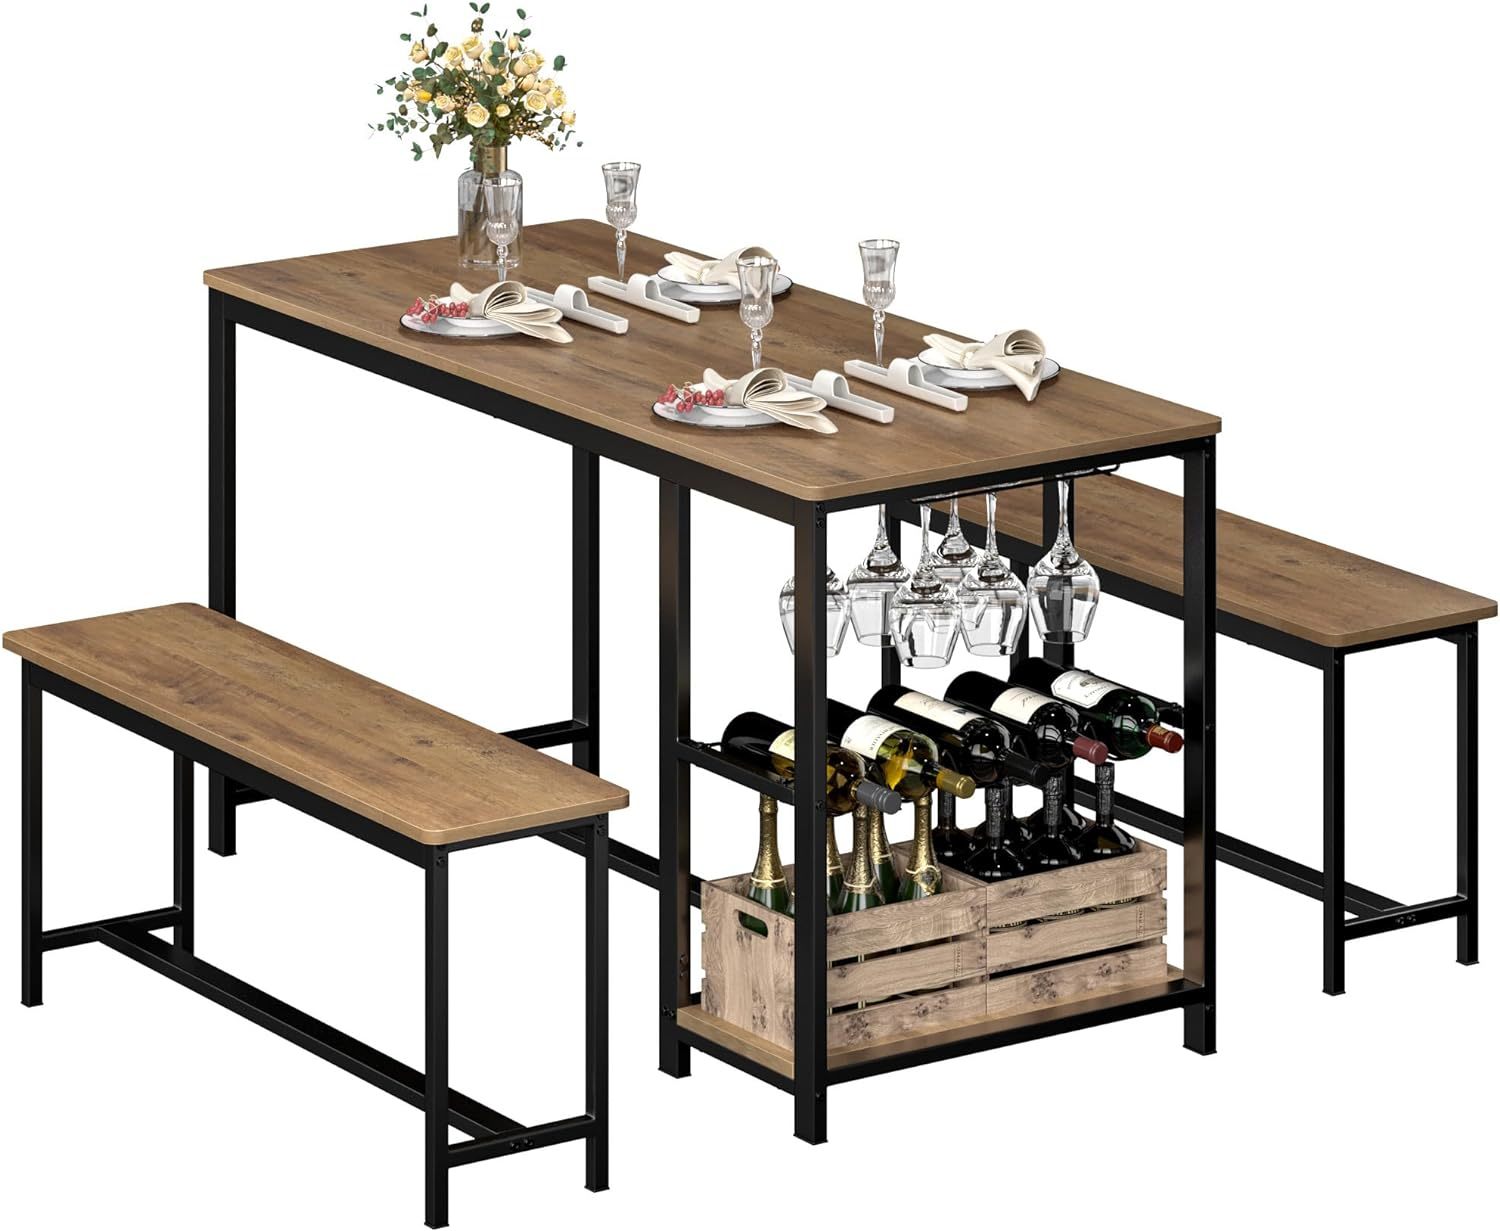 MDF Wood Board 3-Piece Kitchen Dining Table Set